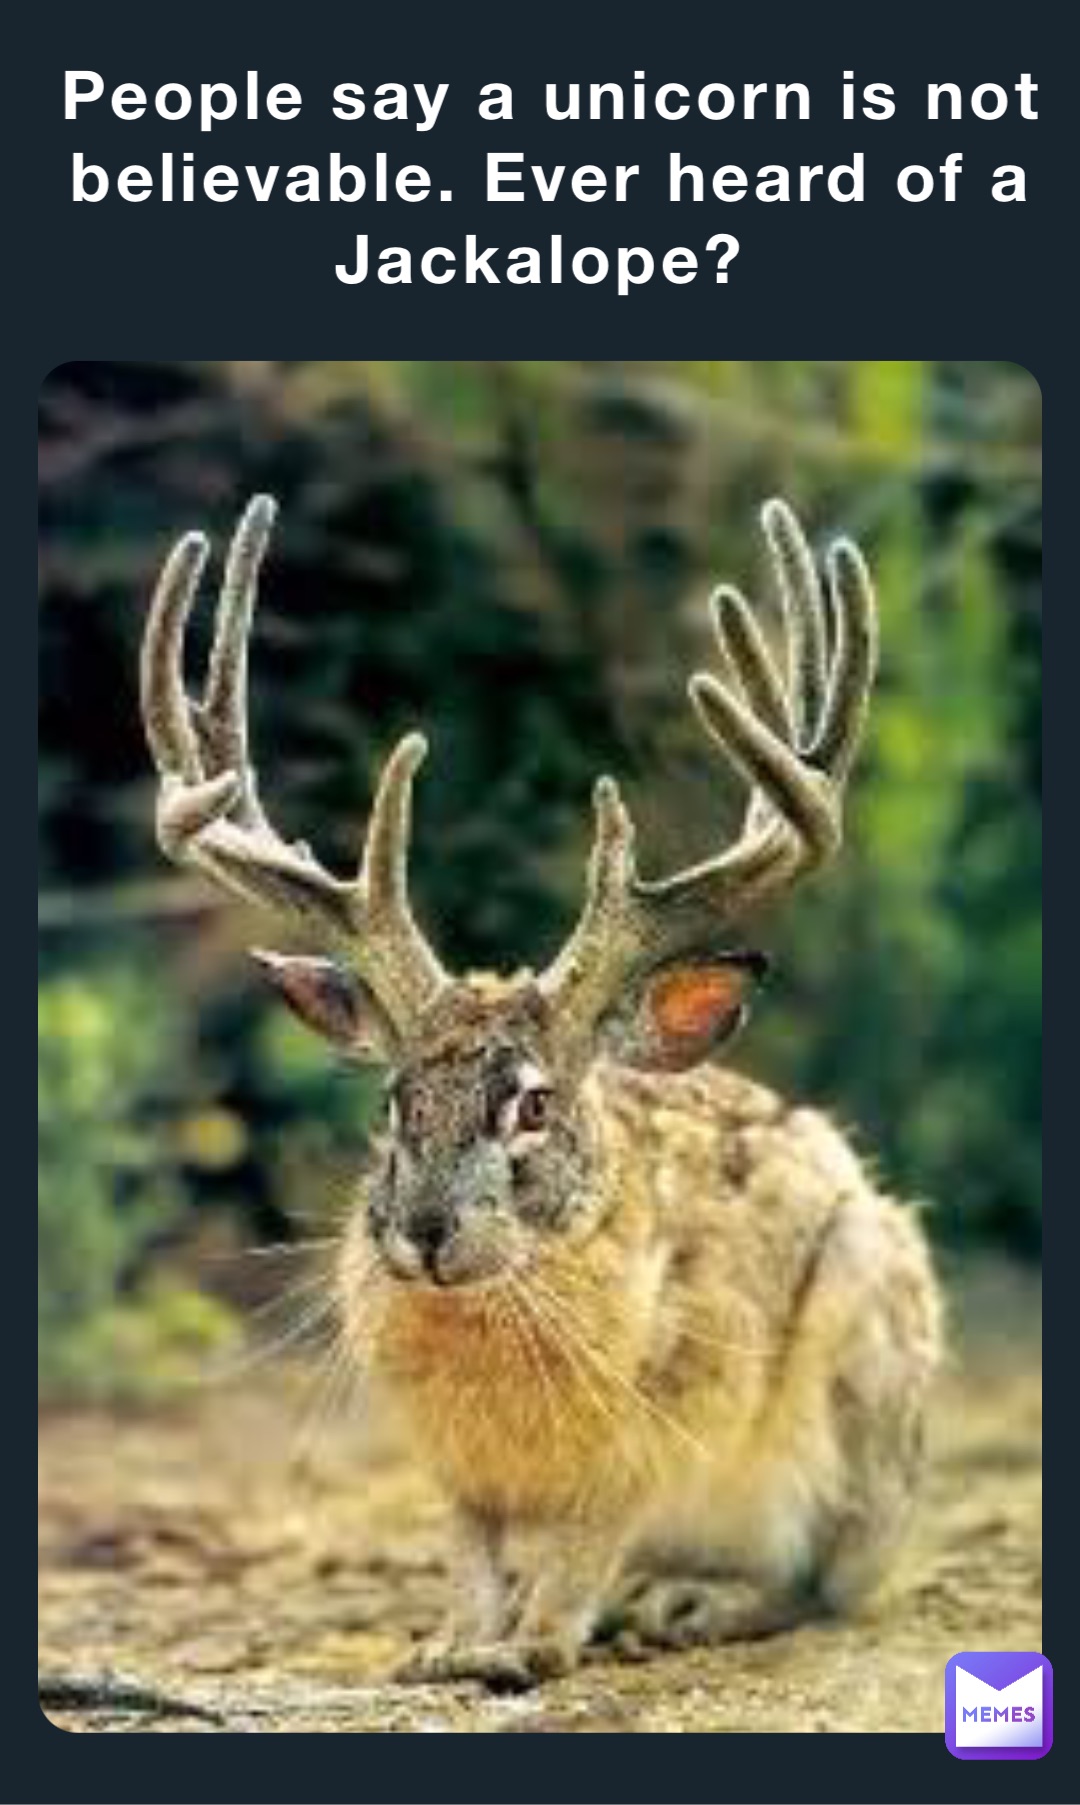 People say a unicorn is not believable. Ever heard of a Jackalope?